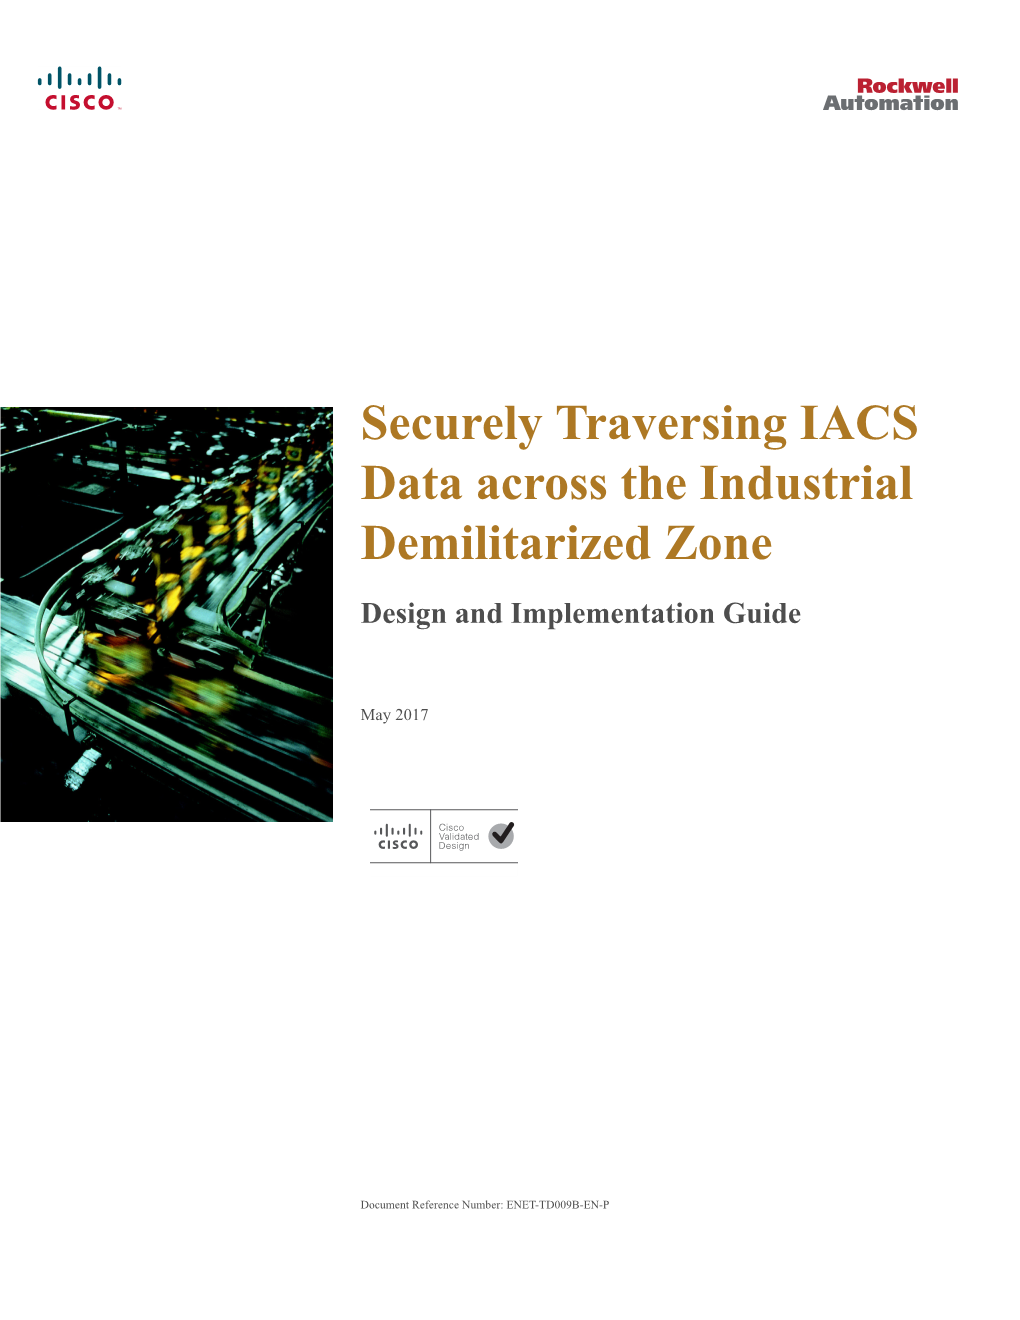 Securely Traversing IACS Data Across the Industrial Demilitarized Zone Design and Implementation Guide